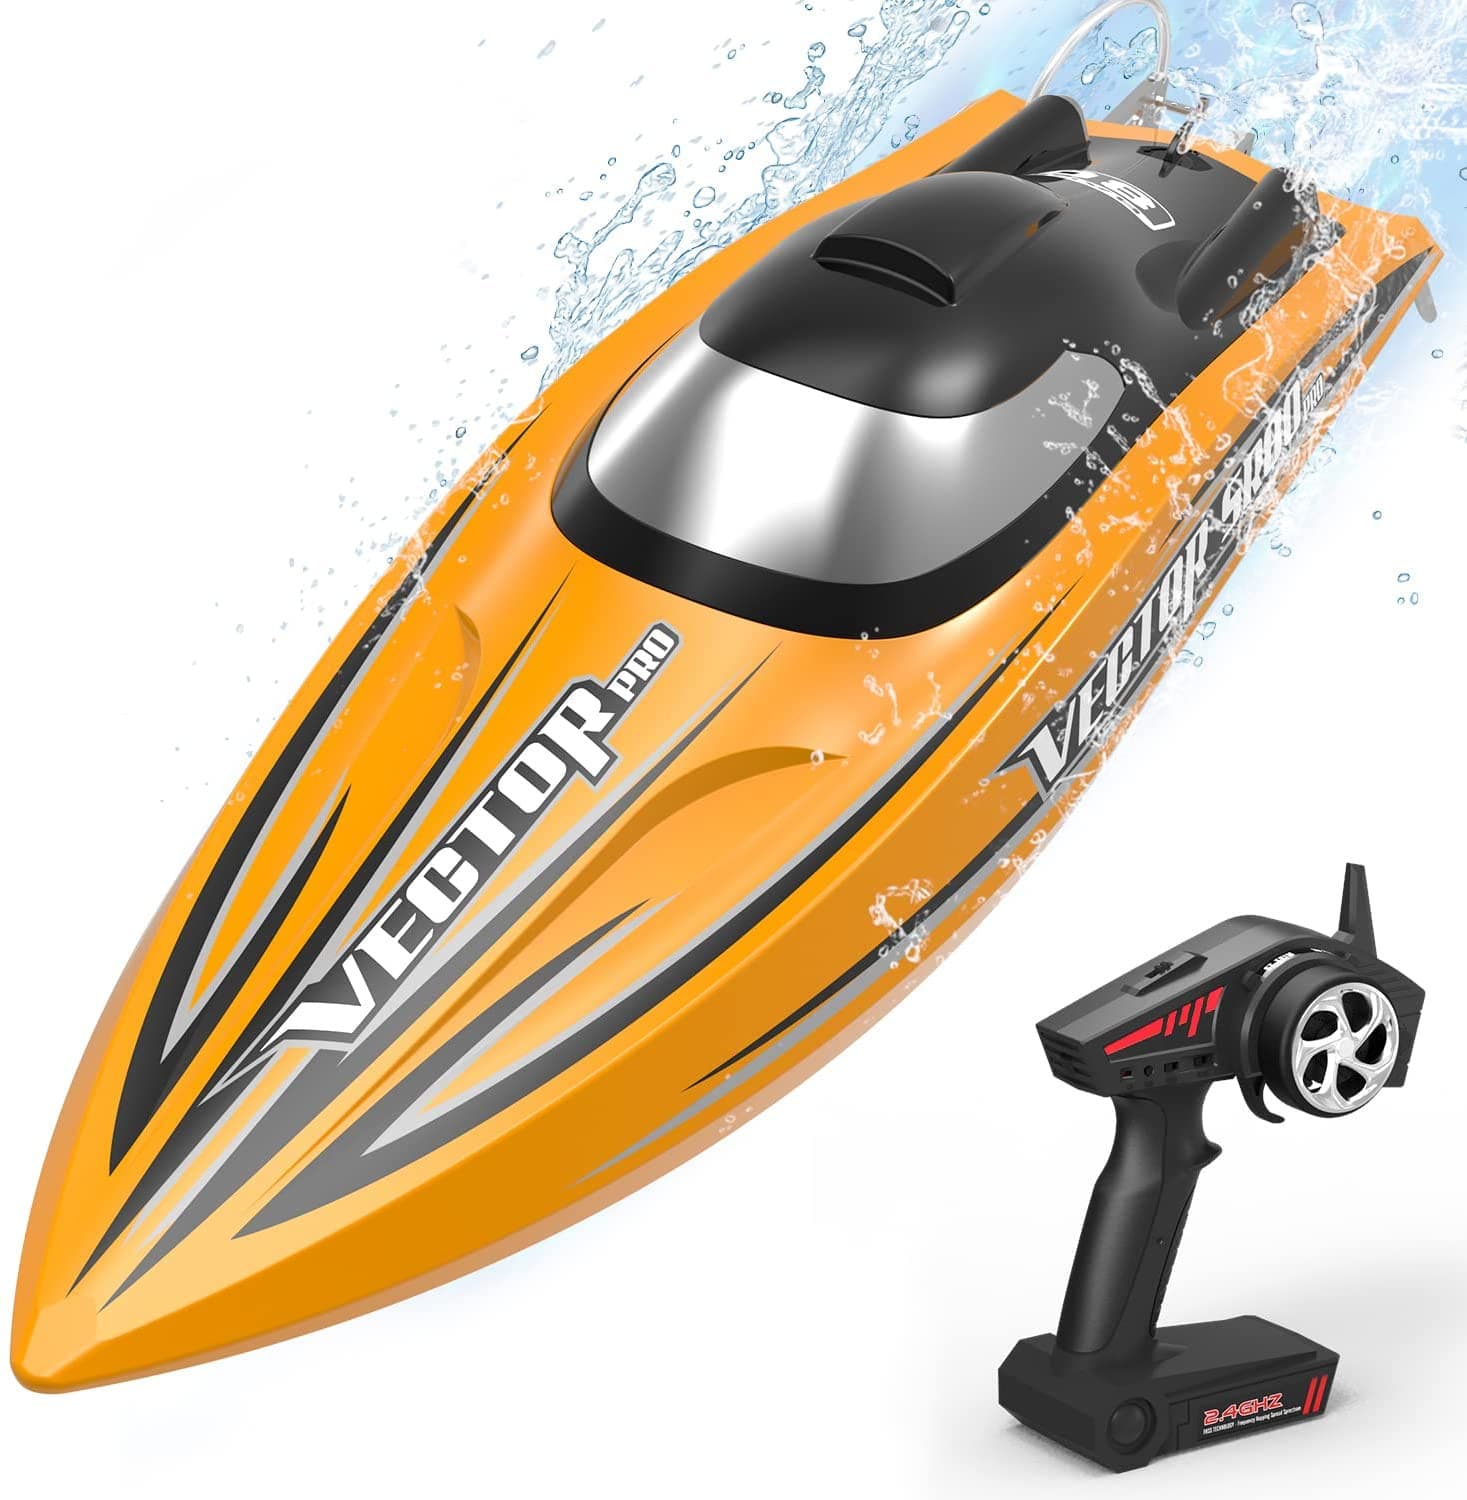 Vector SR80 Pro 50mph Super High Speed Boat with Auto Roll Back Function and All Metal Hardwares (798-4P) RTR - EXHOBBY